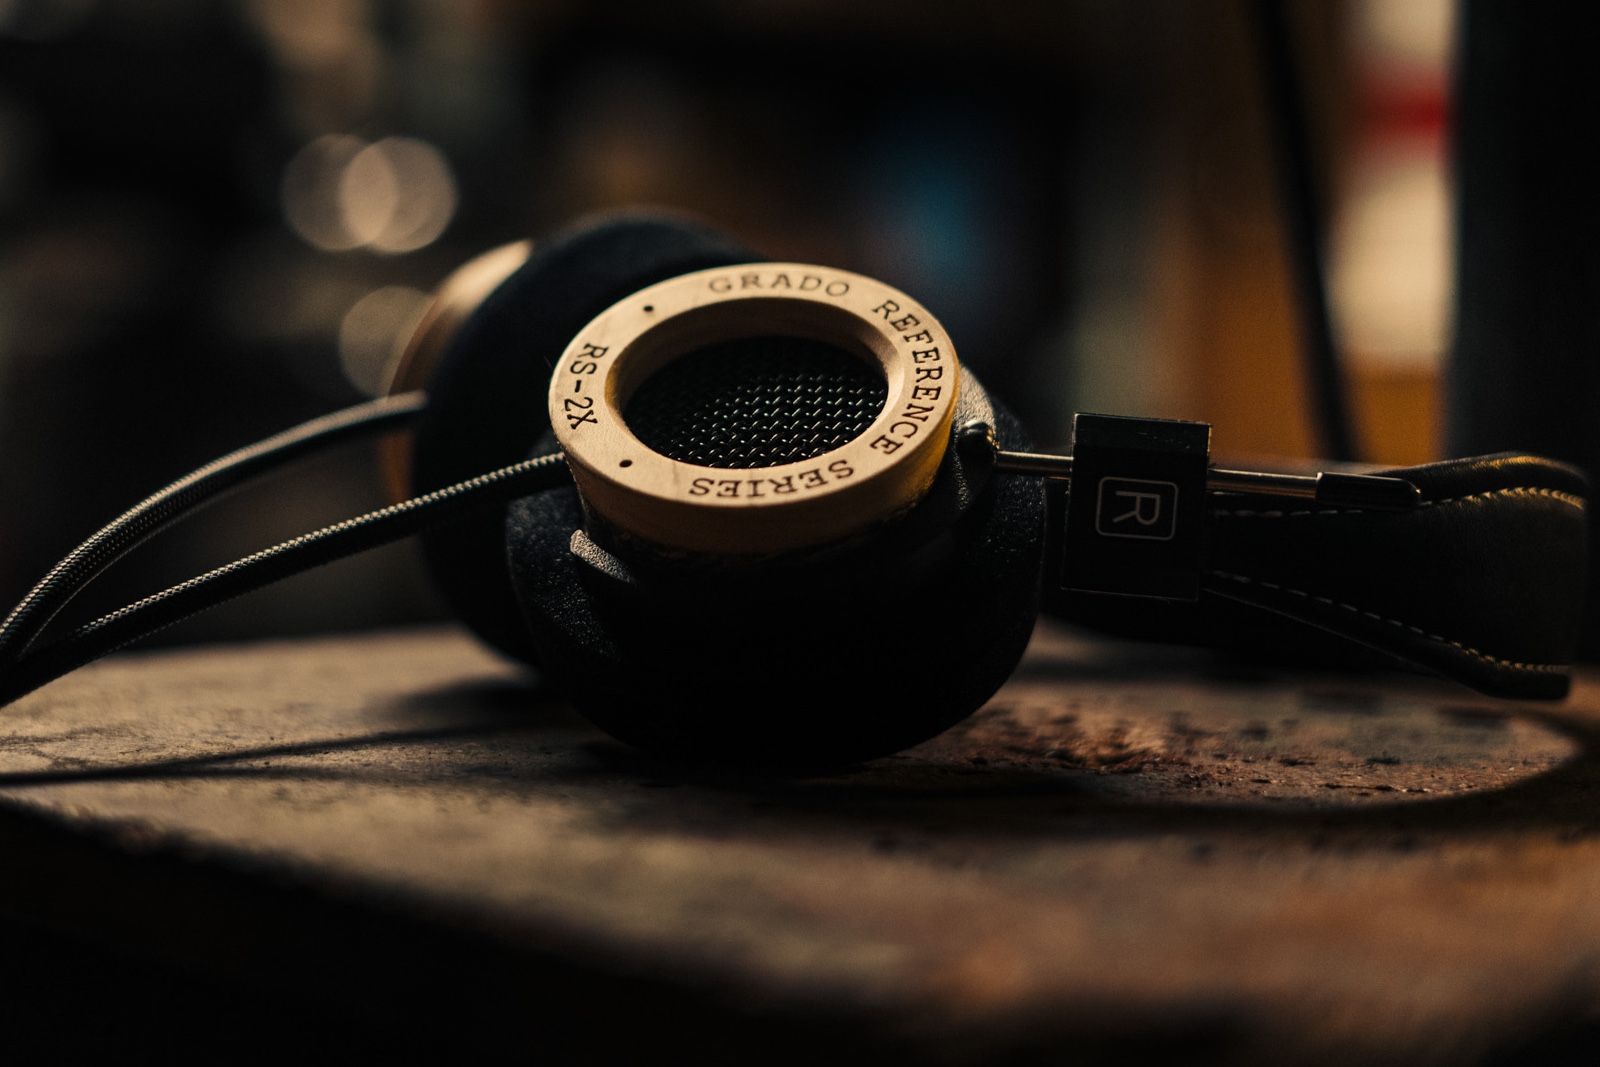 Grado's RS1x and RS2x launched photo 4